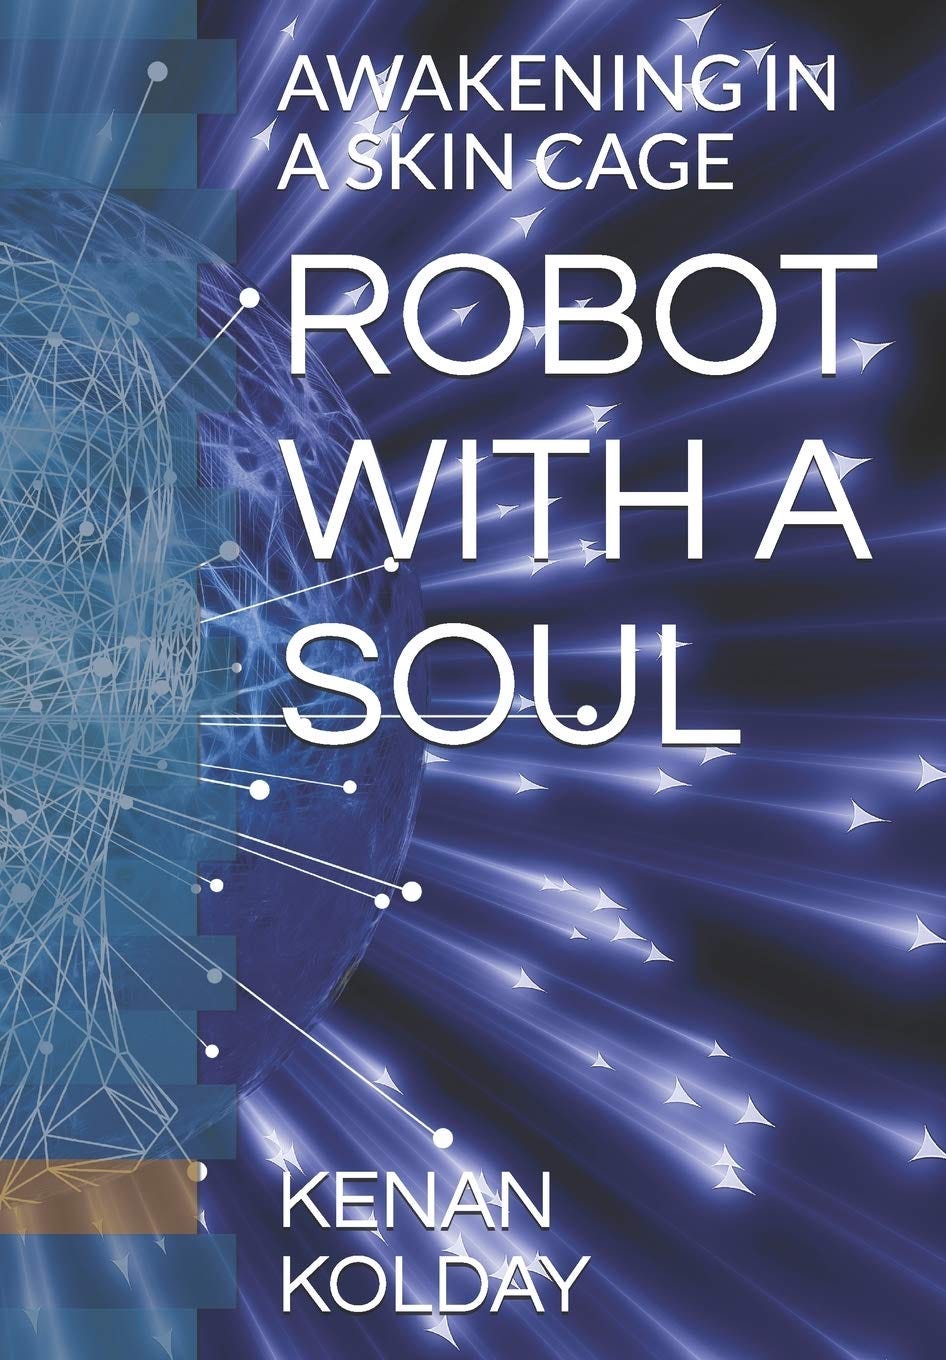 The Robot With A Soul Trilogy Will Help You Unleash Your Untapped Potential  - School of Awakening - Medium